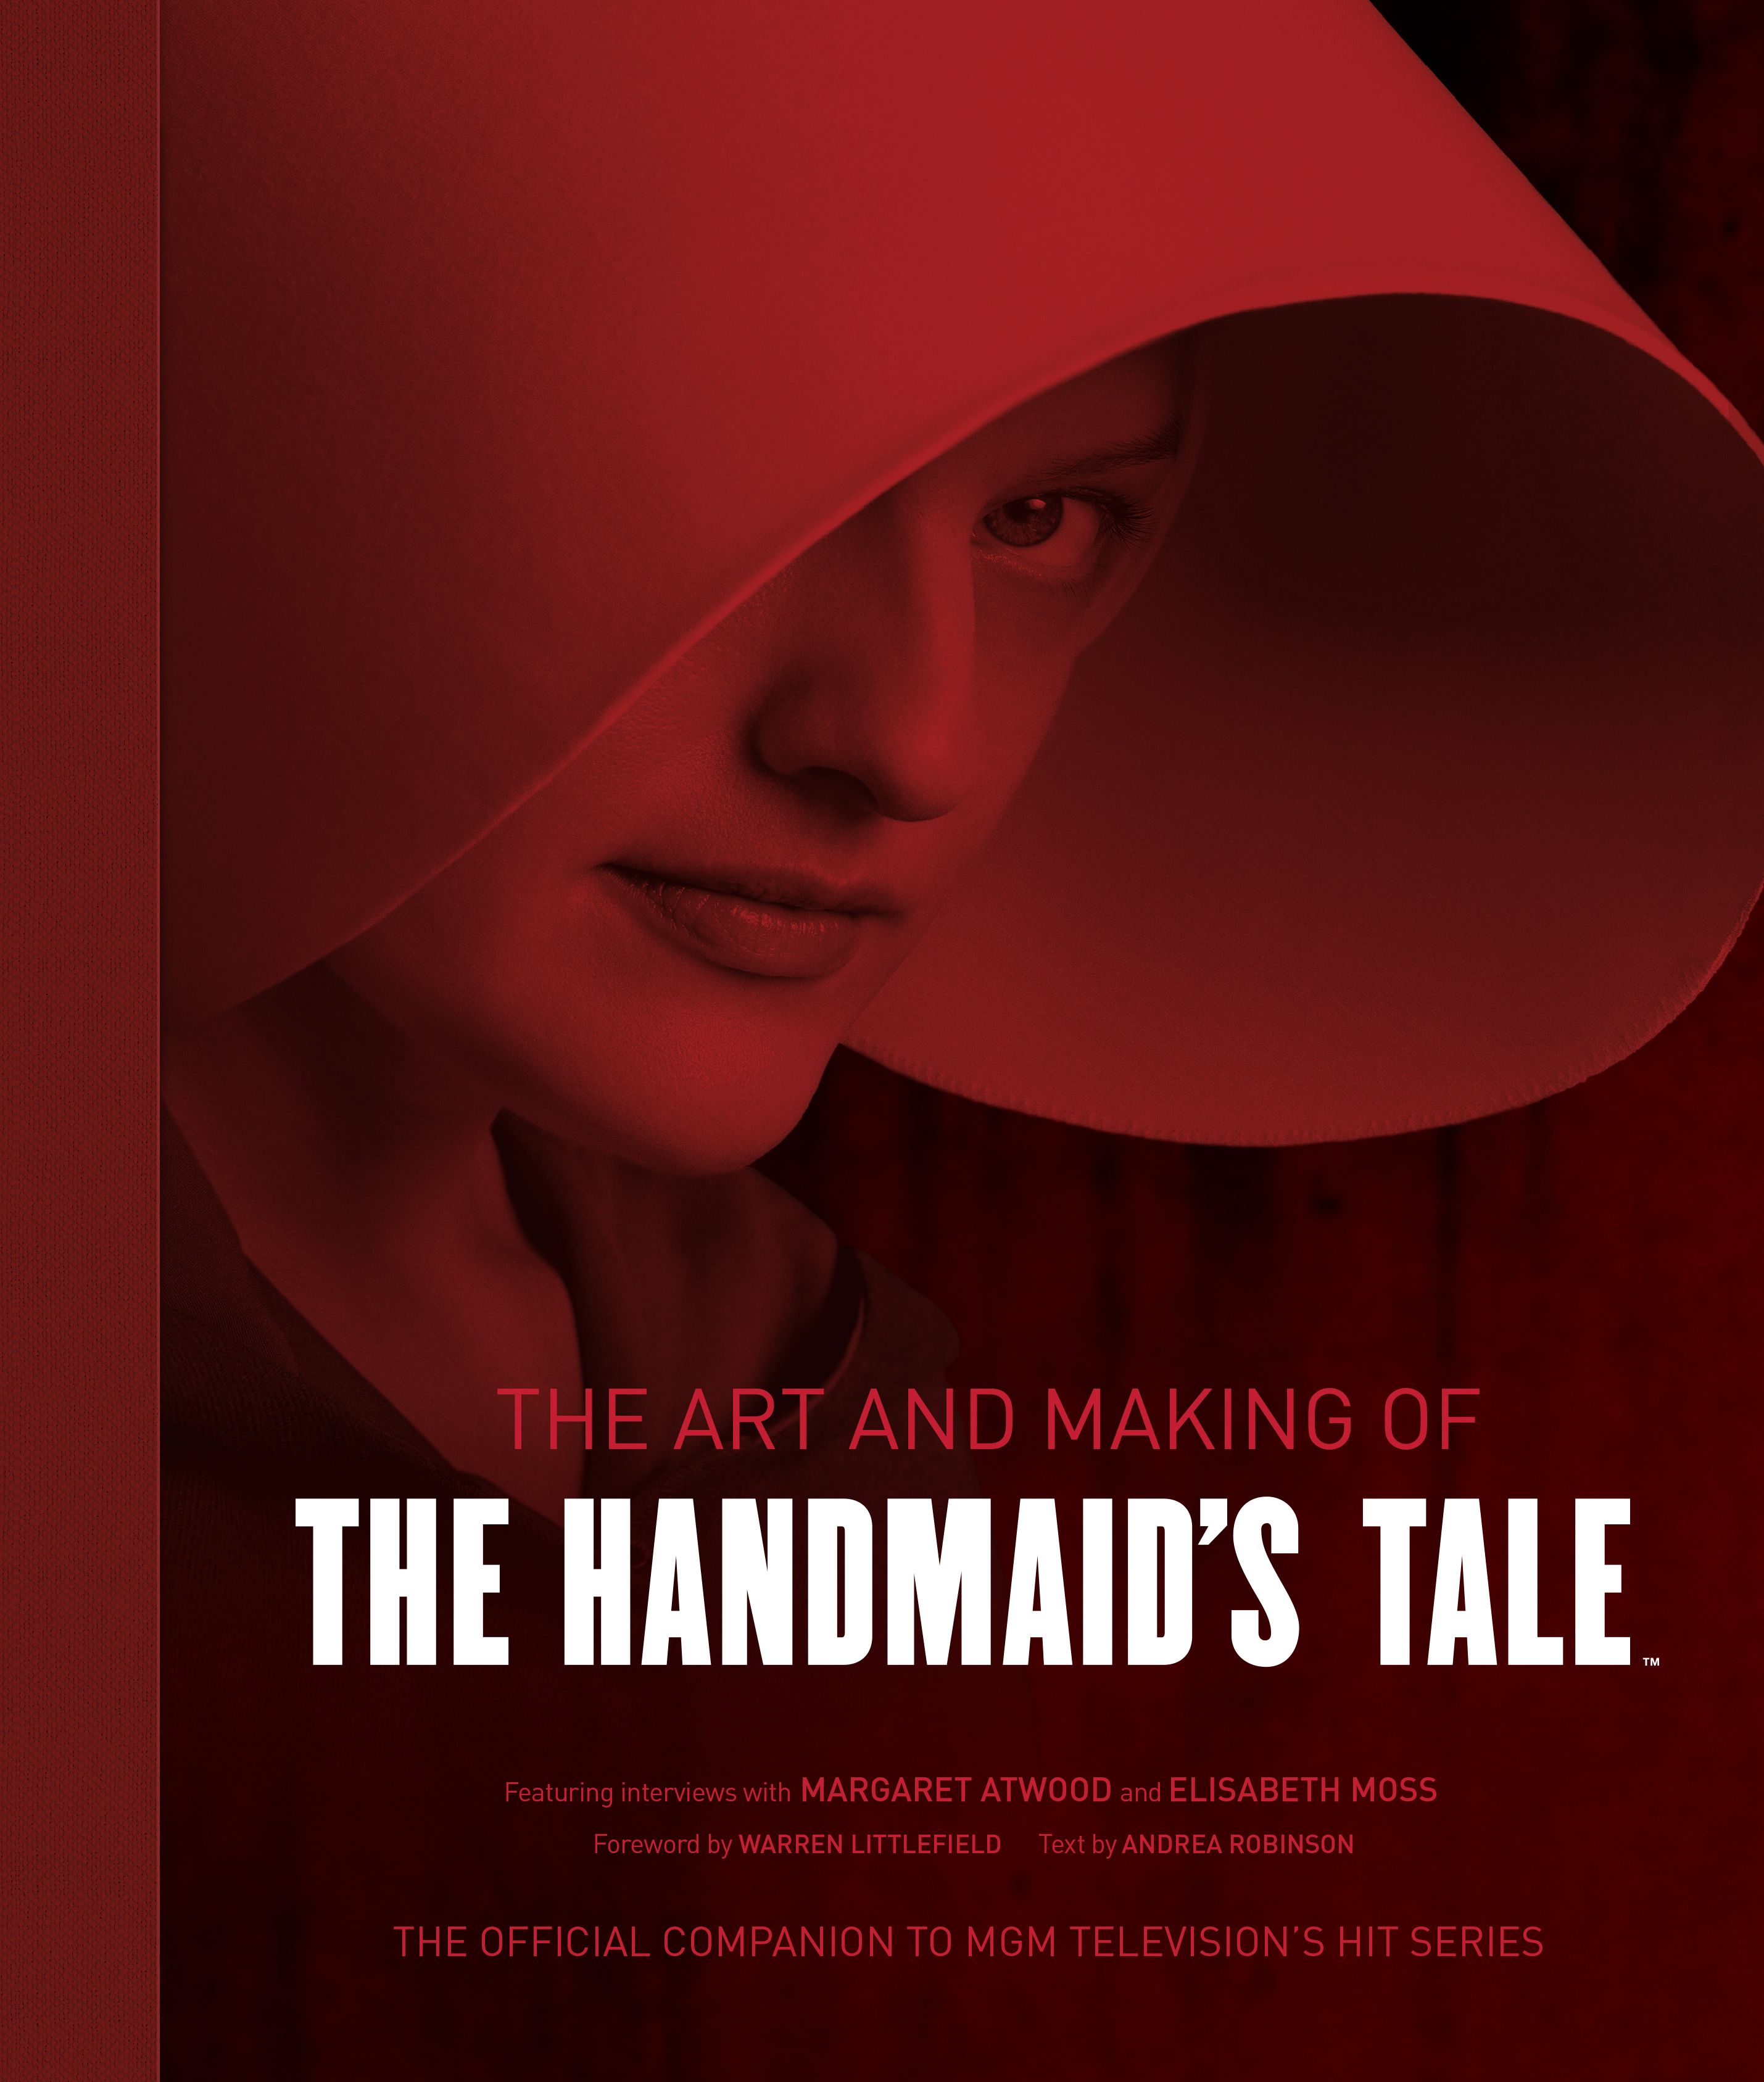 The Art and Making of The Handmaids Tale with Elisabeth Moss on the Cover